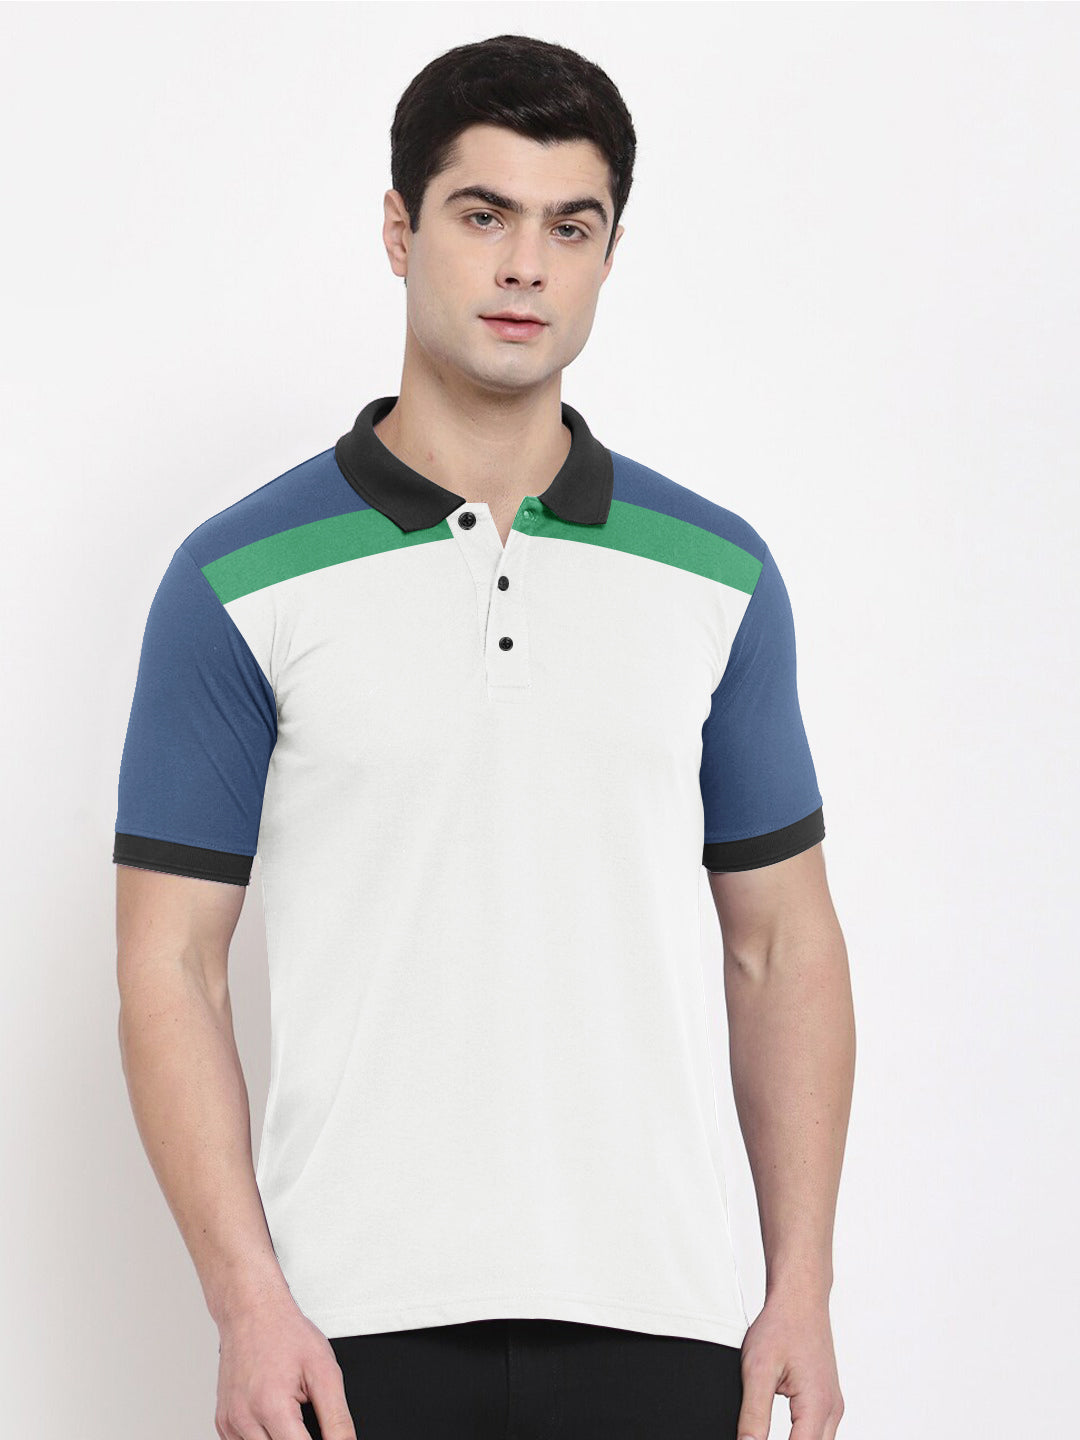 Summer Polo Shirt For Men-White & Blue With Green-RT50